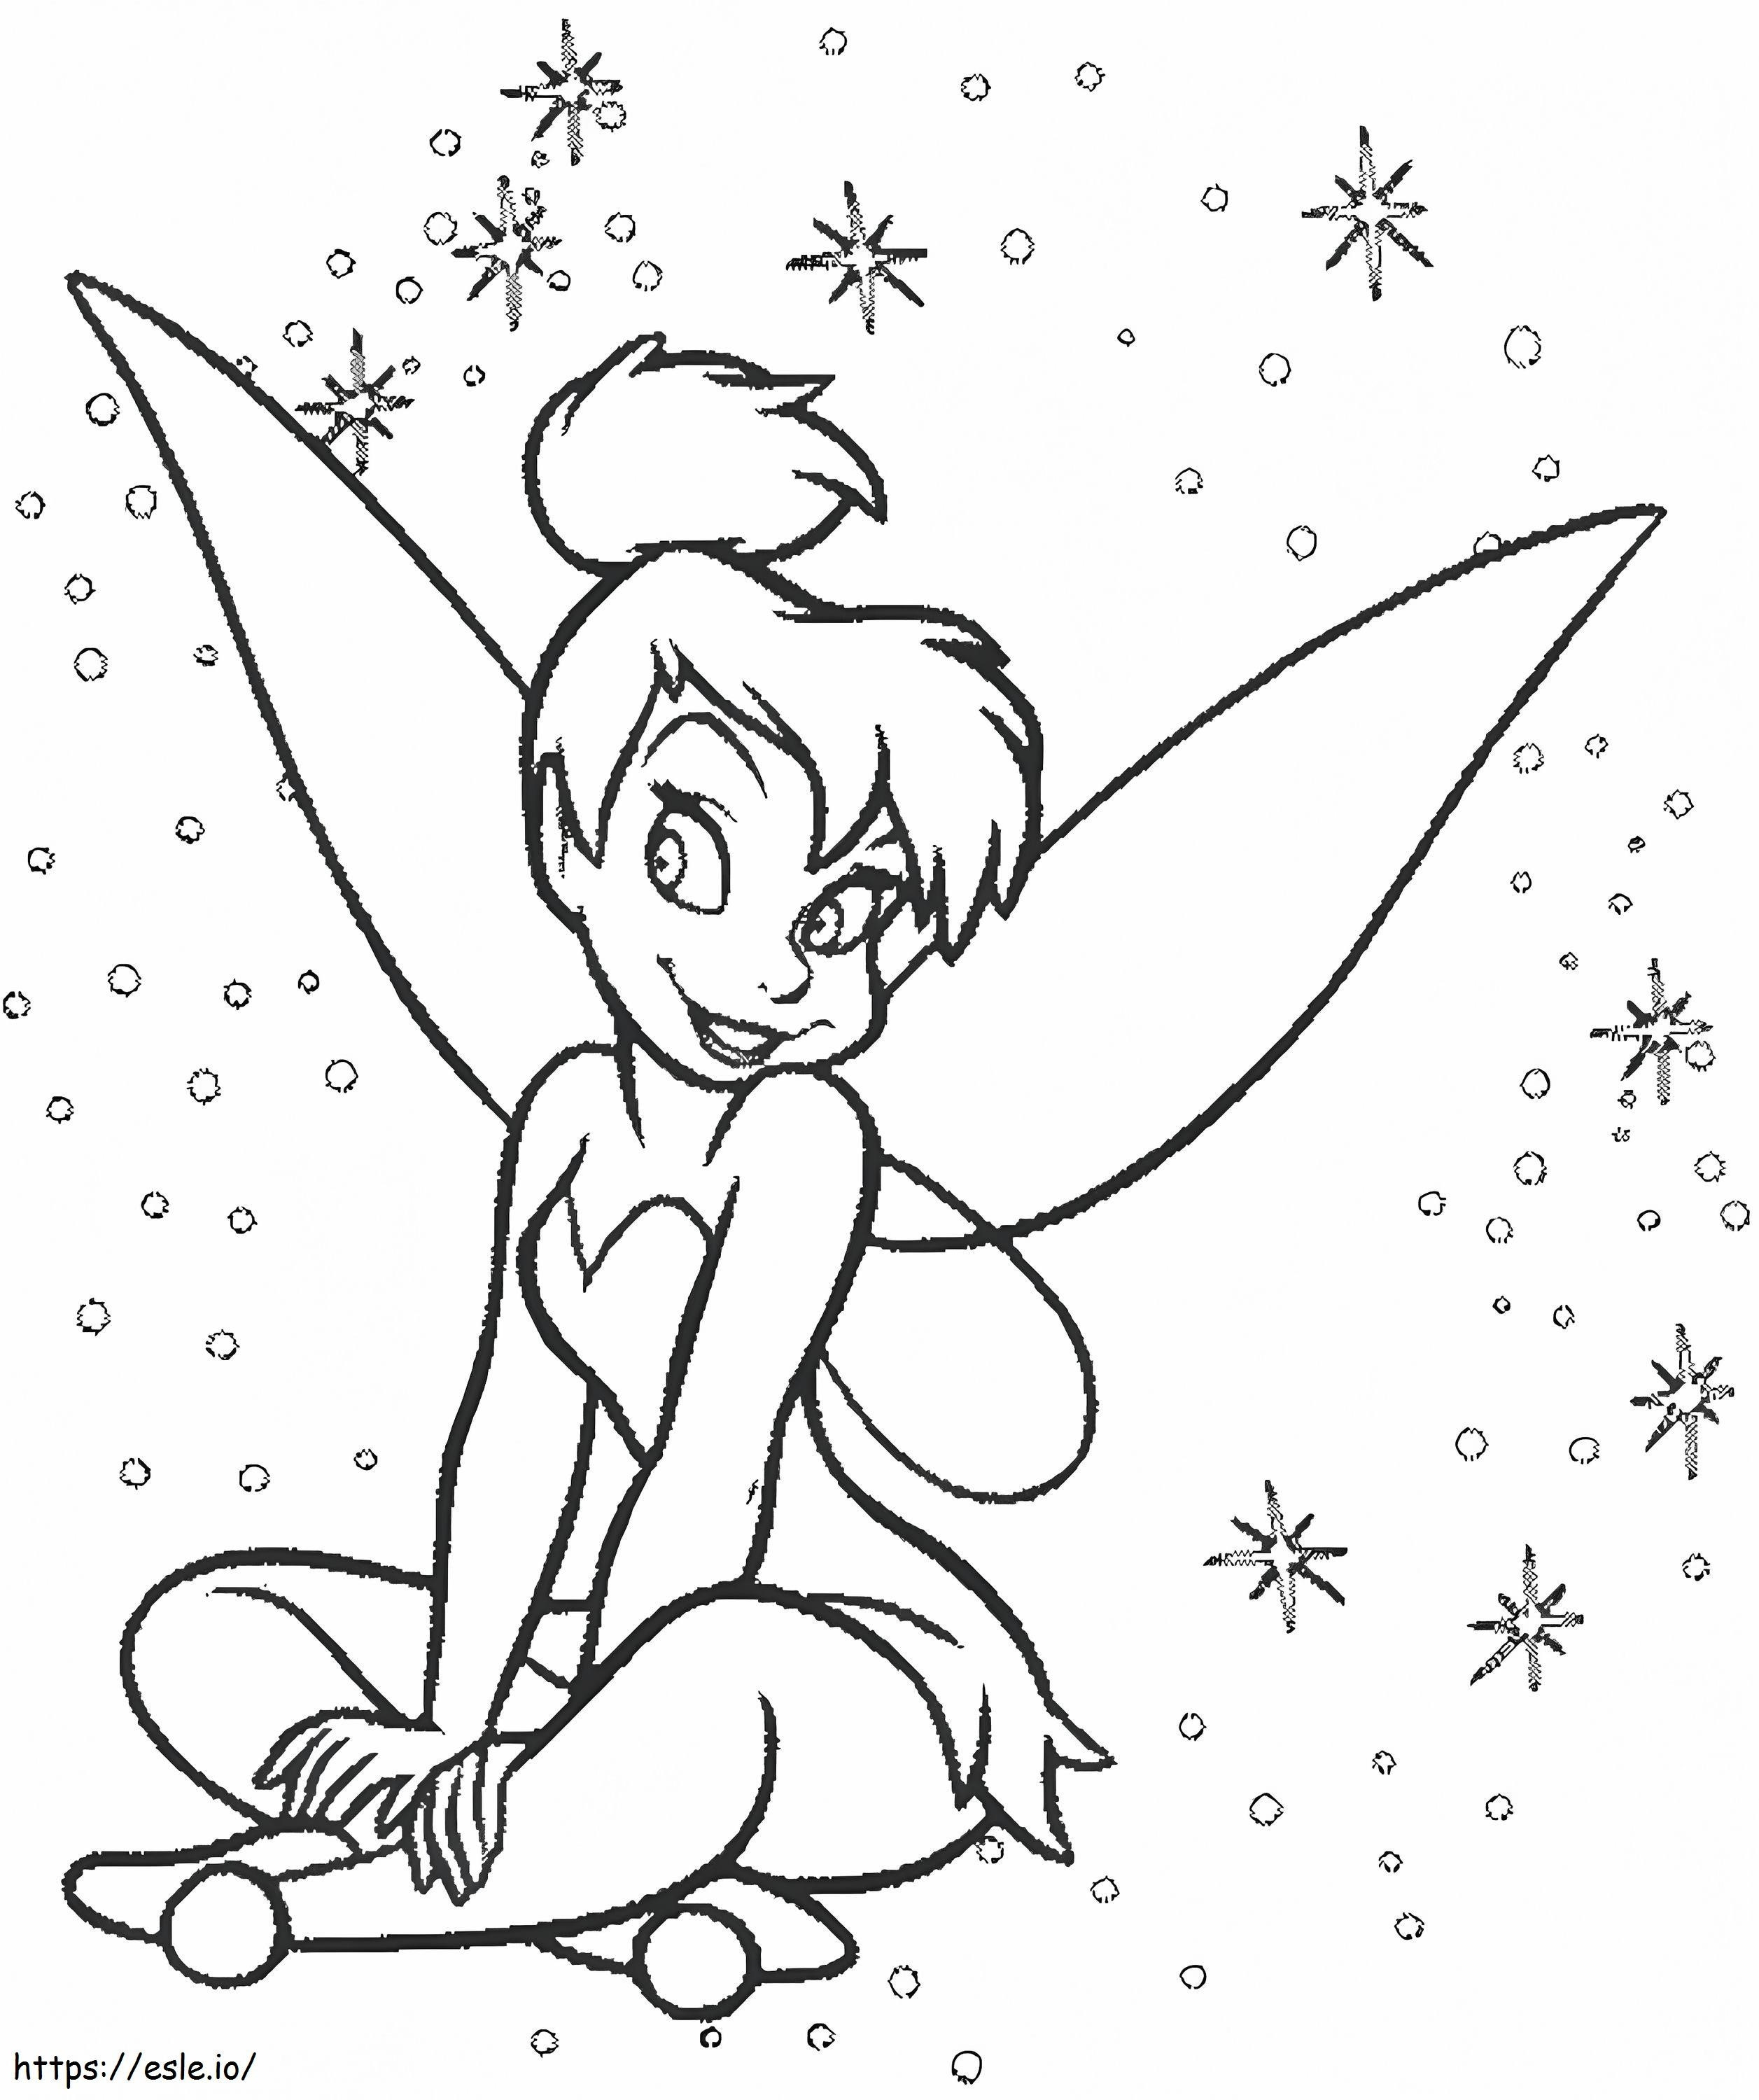 1582338975 Tinkerbell Free Printable 95816 coloring page